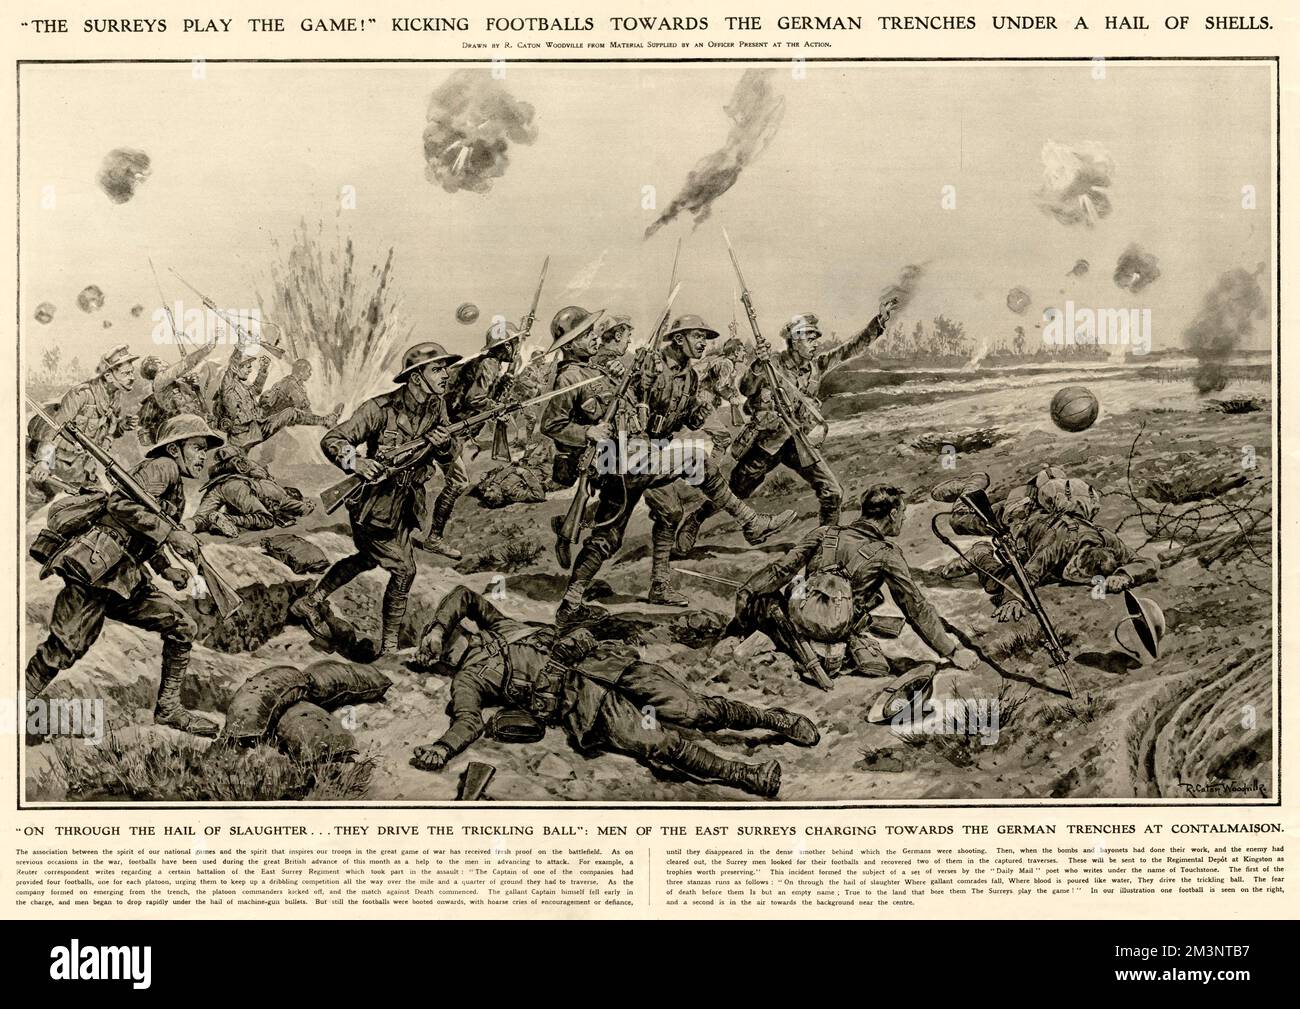 'The Surreys play the game!' Kicking footballs towards the German trenches under a hail of shells during World War One. Men of the East Surreys charging towards the enemy at Contalmaison, France.Drawn by R. Caton Woodville from material supplied by an officer present at the action.     Date: 1916 Stock Photo